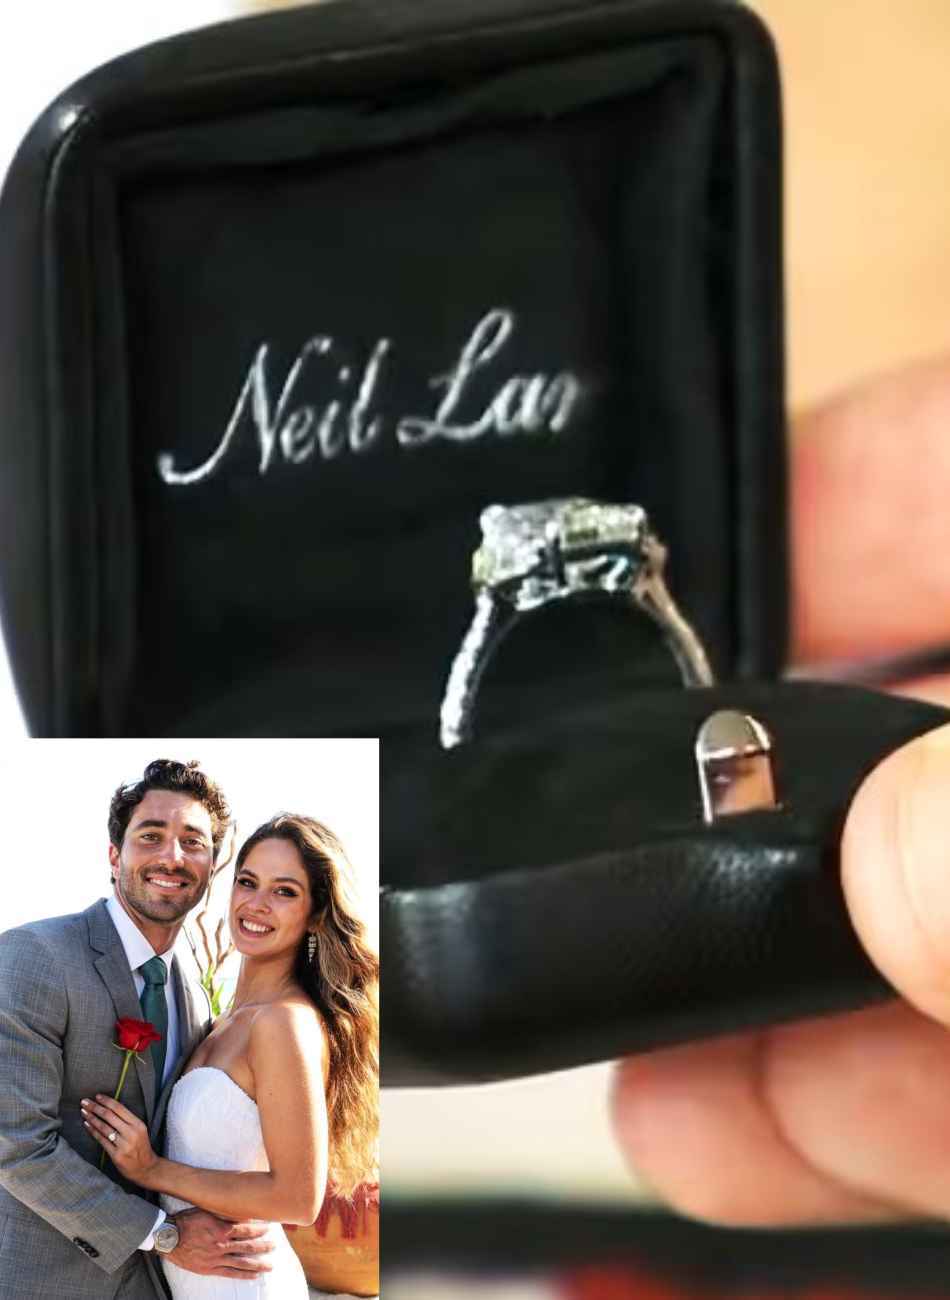 The Bachelor Finale Drama and Twist Kelsey Engagement Ring Price Details